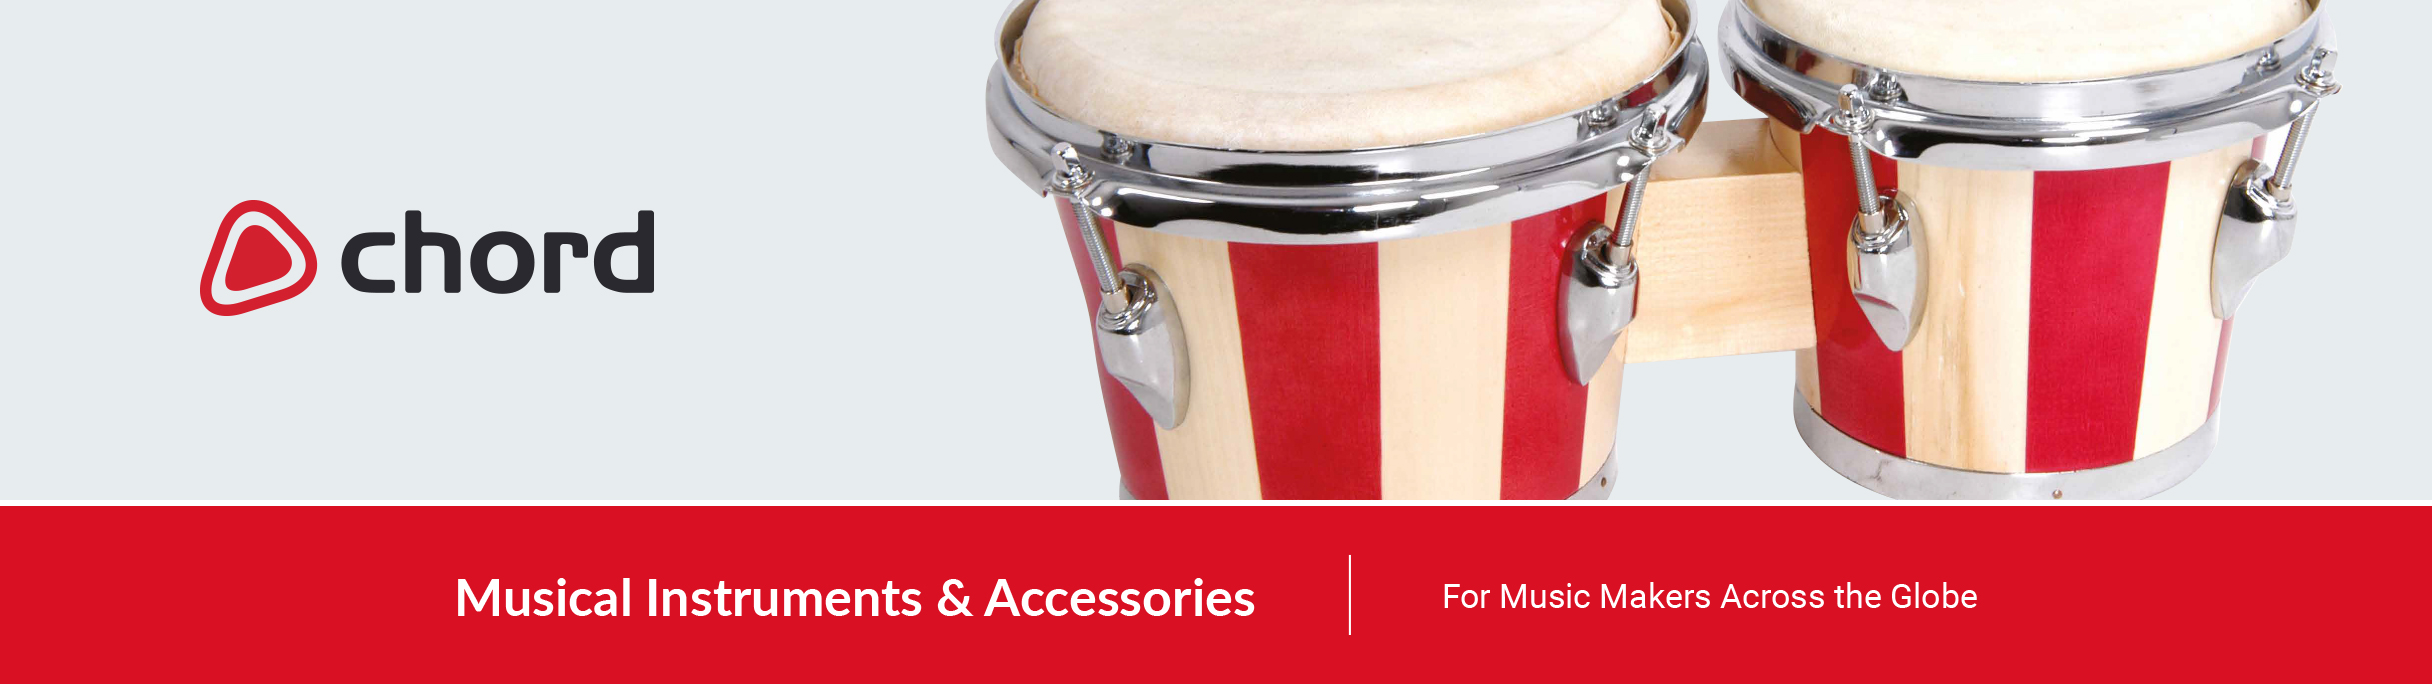 Chord - Musical Instruments & Accessories - For Music Makers Across the Globe